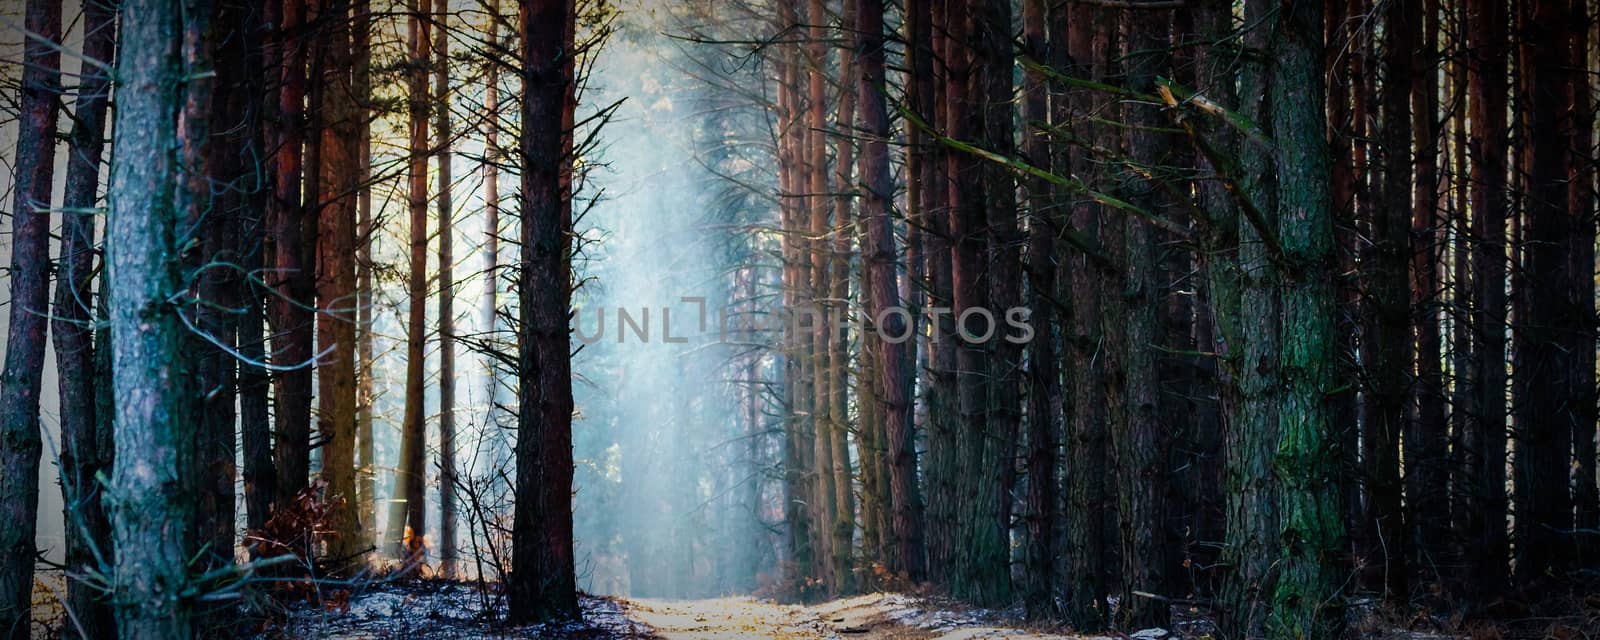 Sunlight in the grey forest, nature series